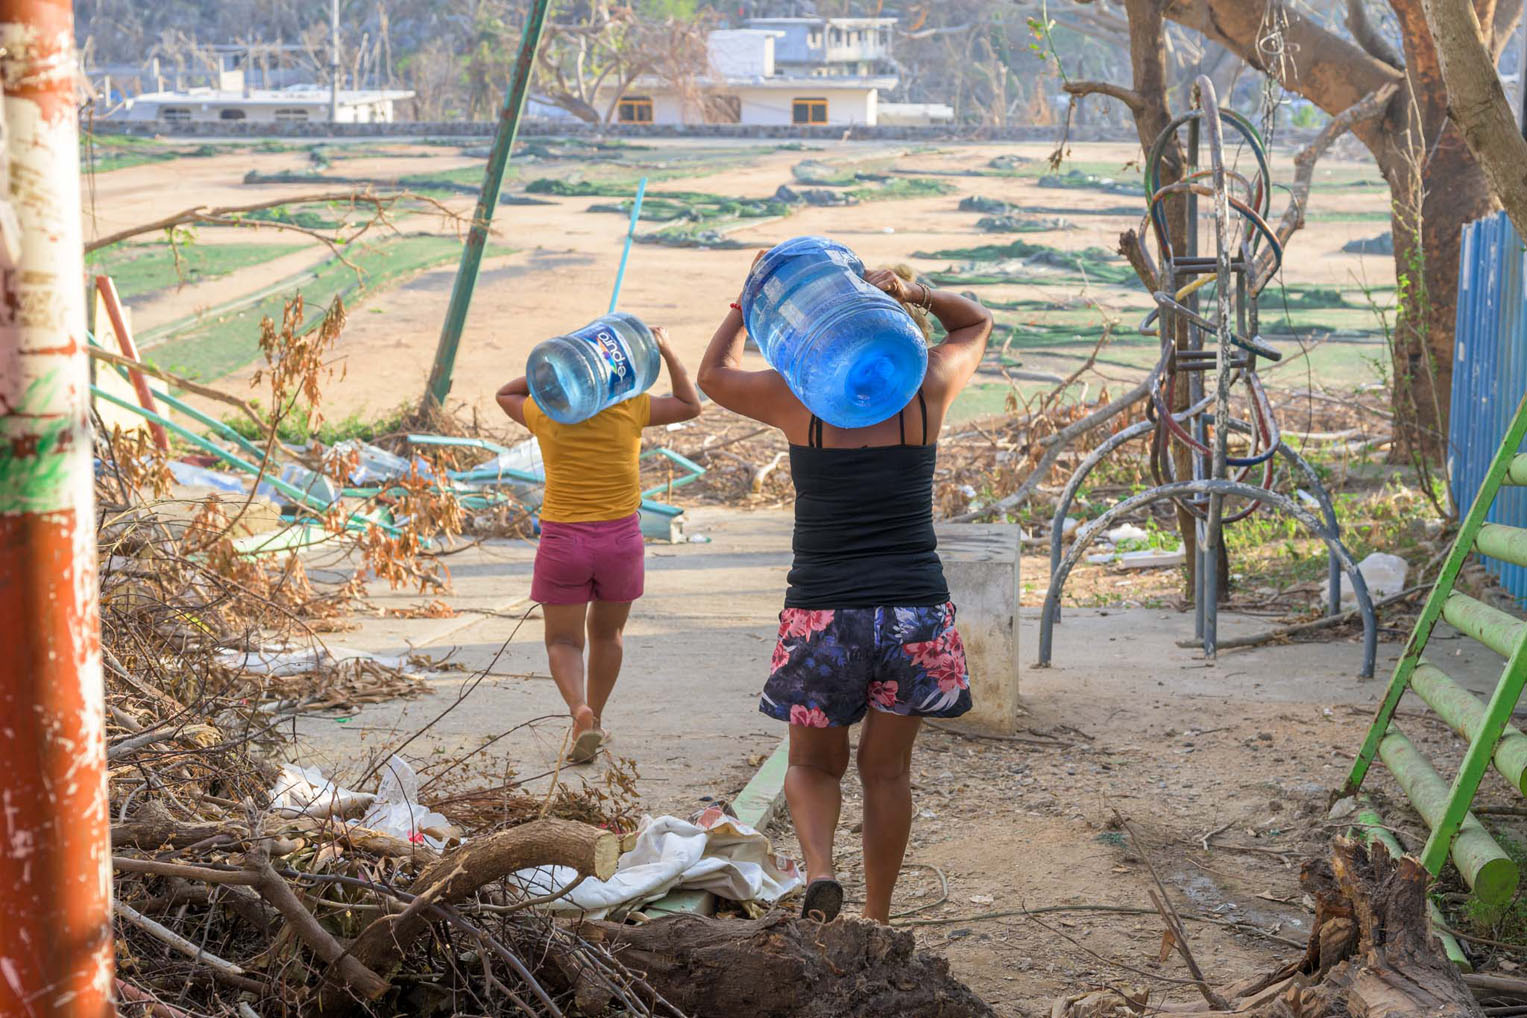 Two women carry home large bottles of water provided through the filter systems established by Samaritan's Purse.